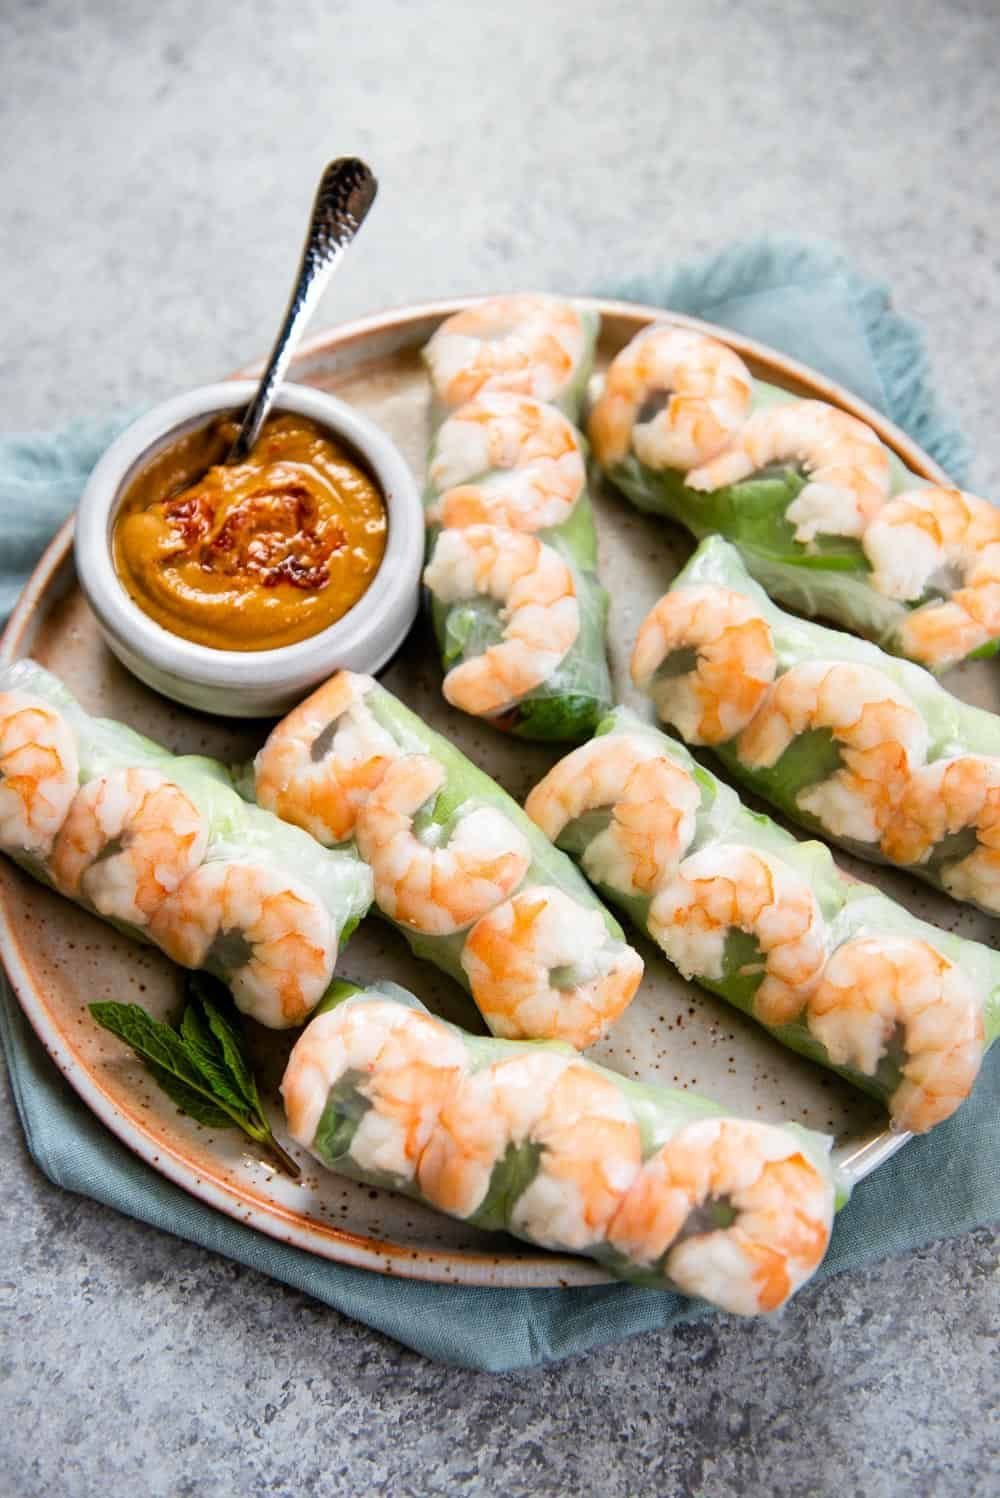 Next Happening: Cucumber Craze: From Cocktails to Pickles + A Vietnamese Summer Roll Recipe!